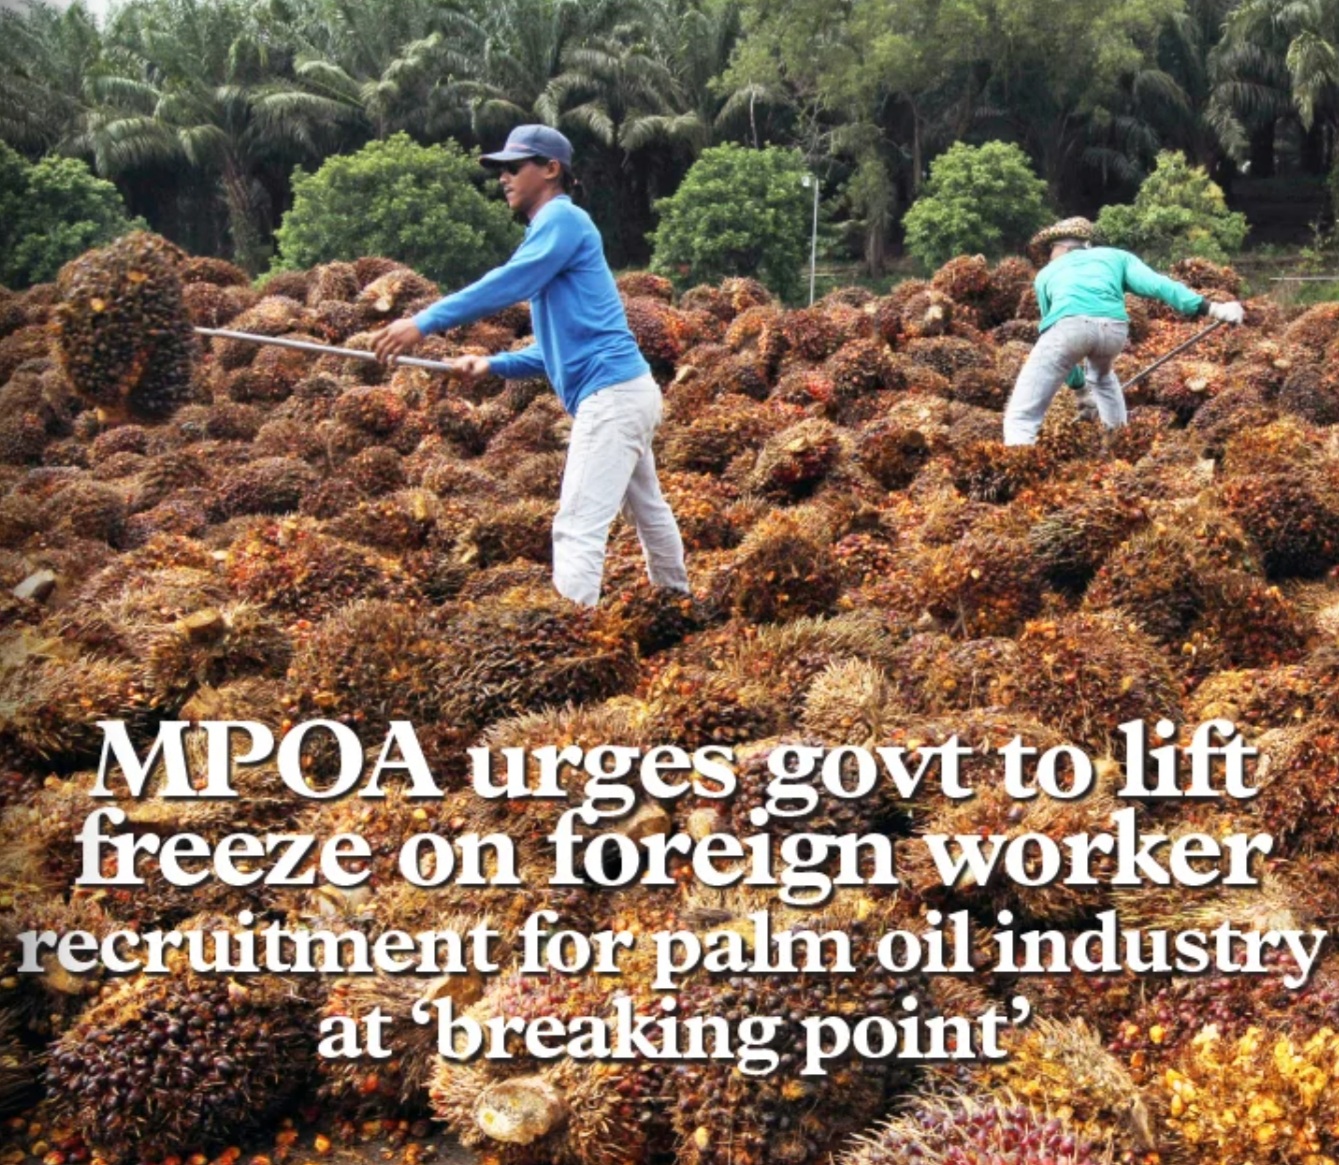 MPOA urges govt to lift freeze on foreign worker recruitment for palm oil industry at ‘breaking point’